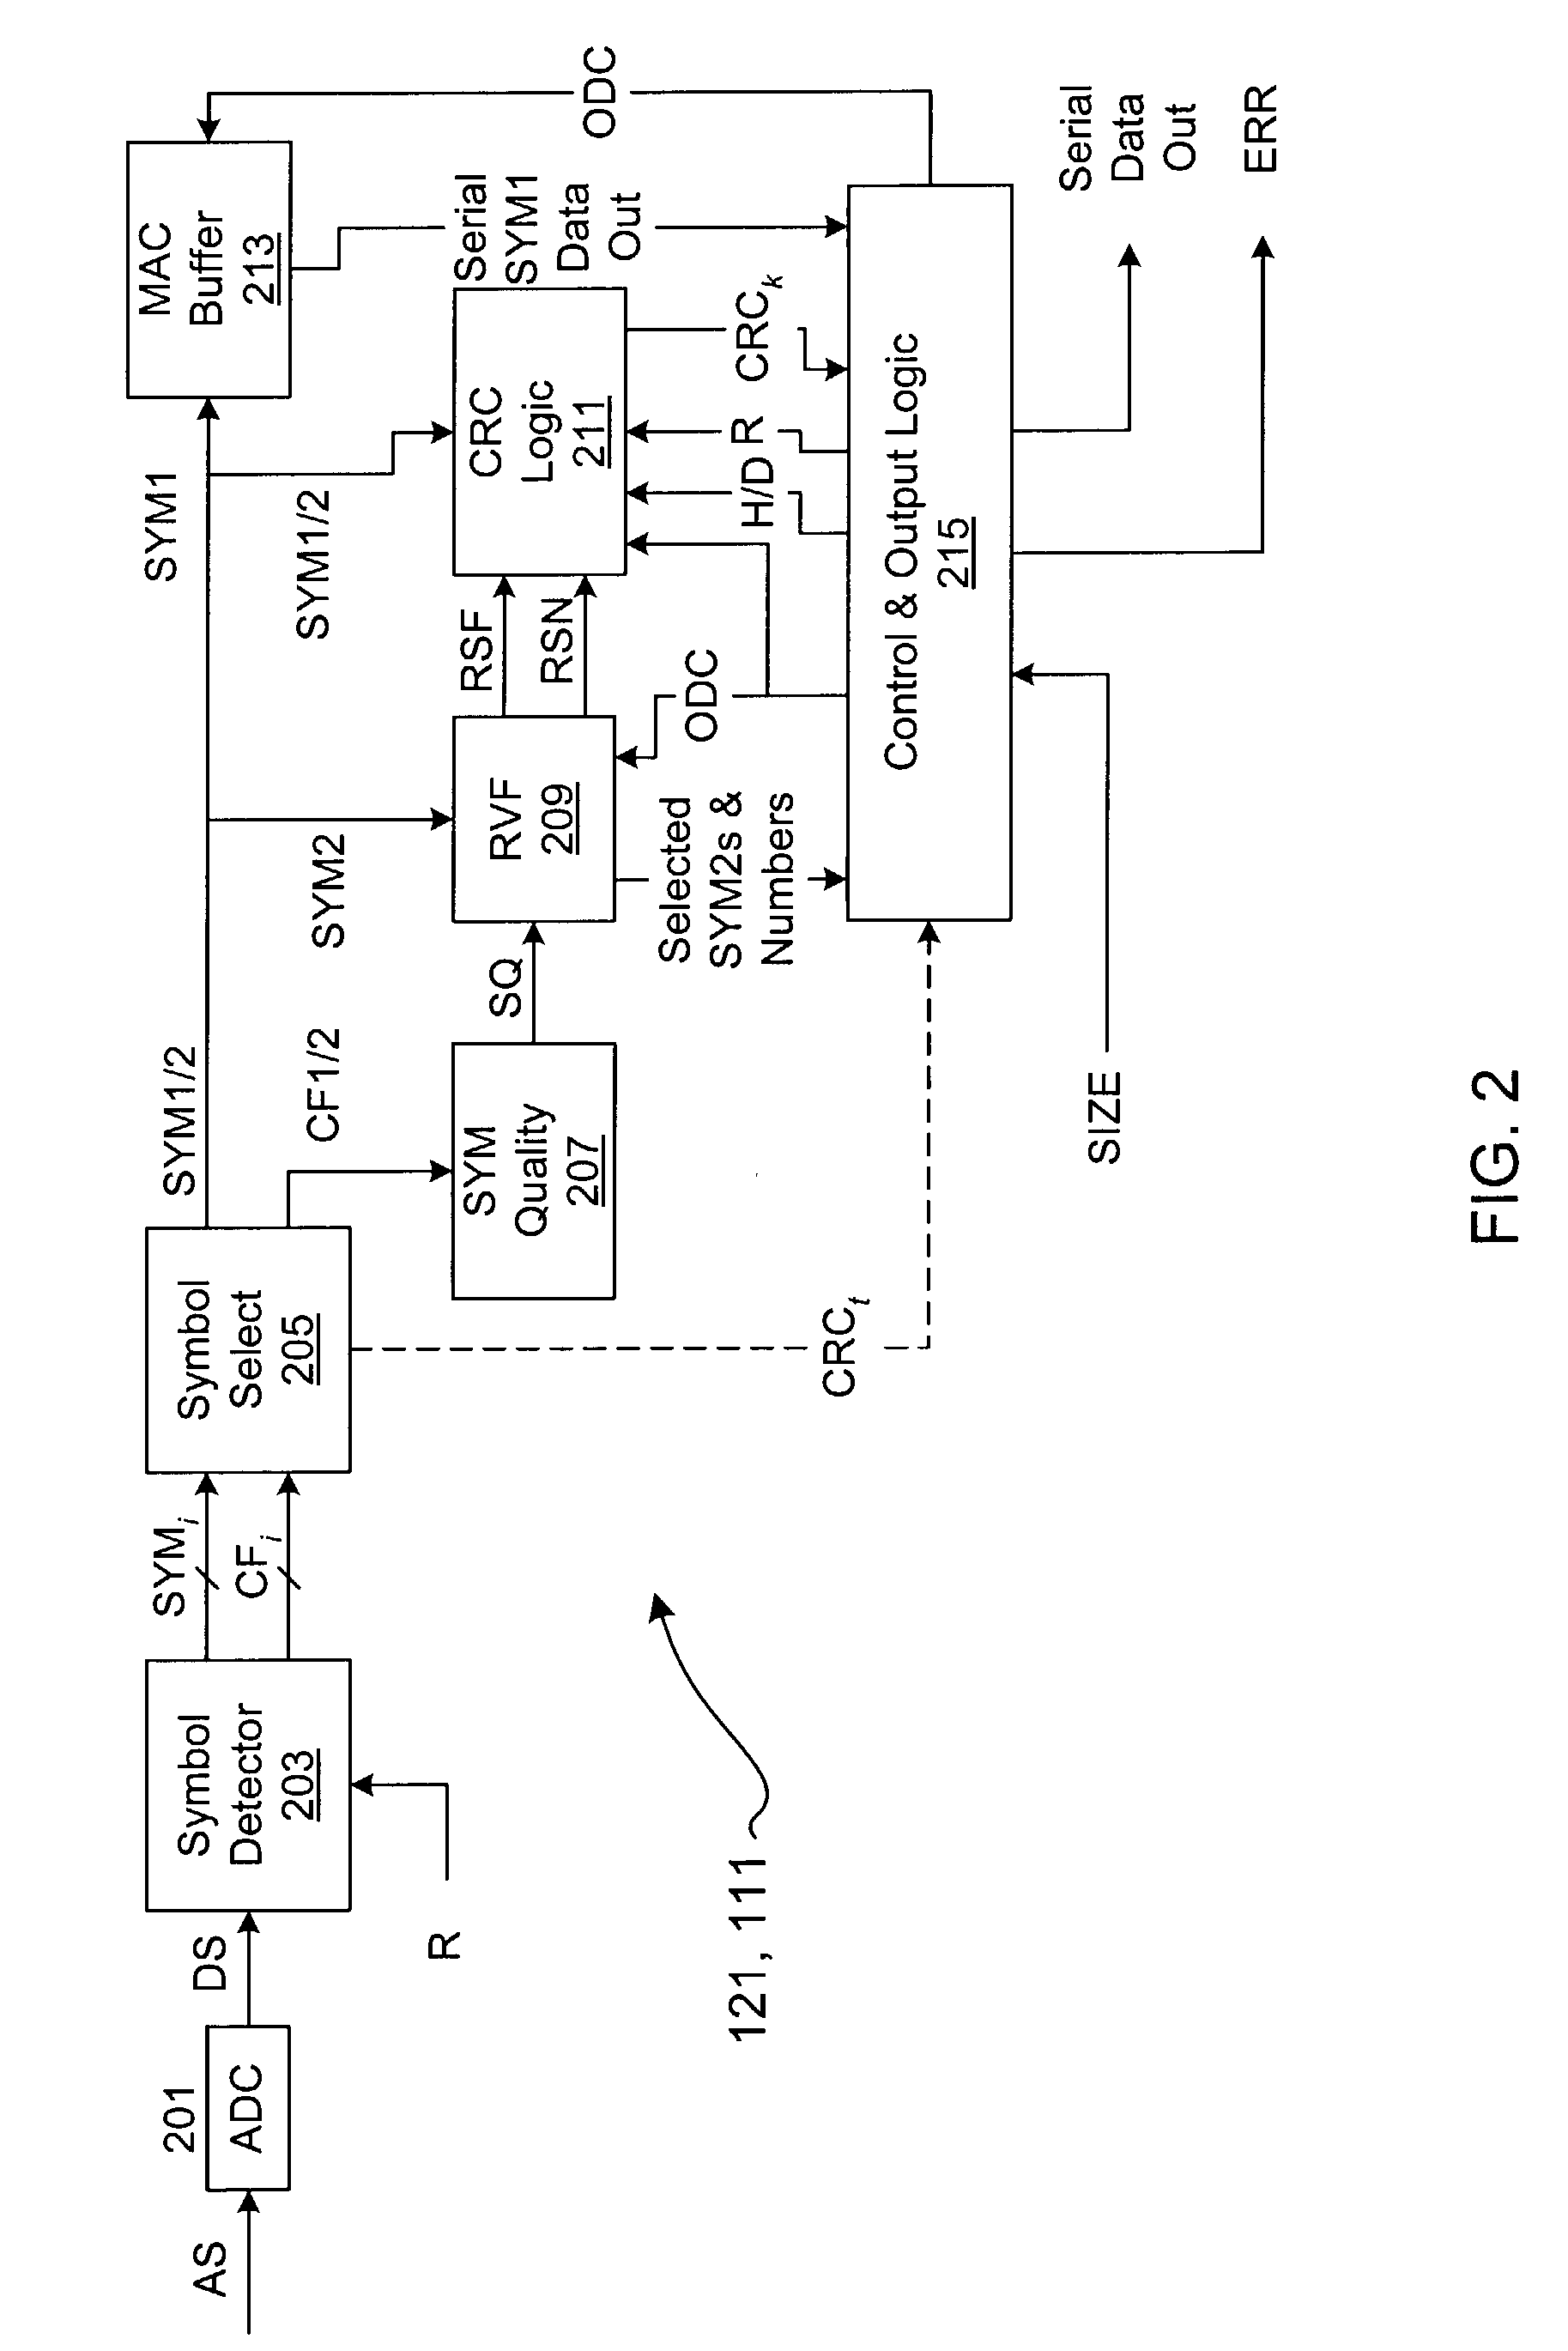 Forward error correction system for wireless communications